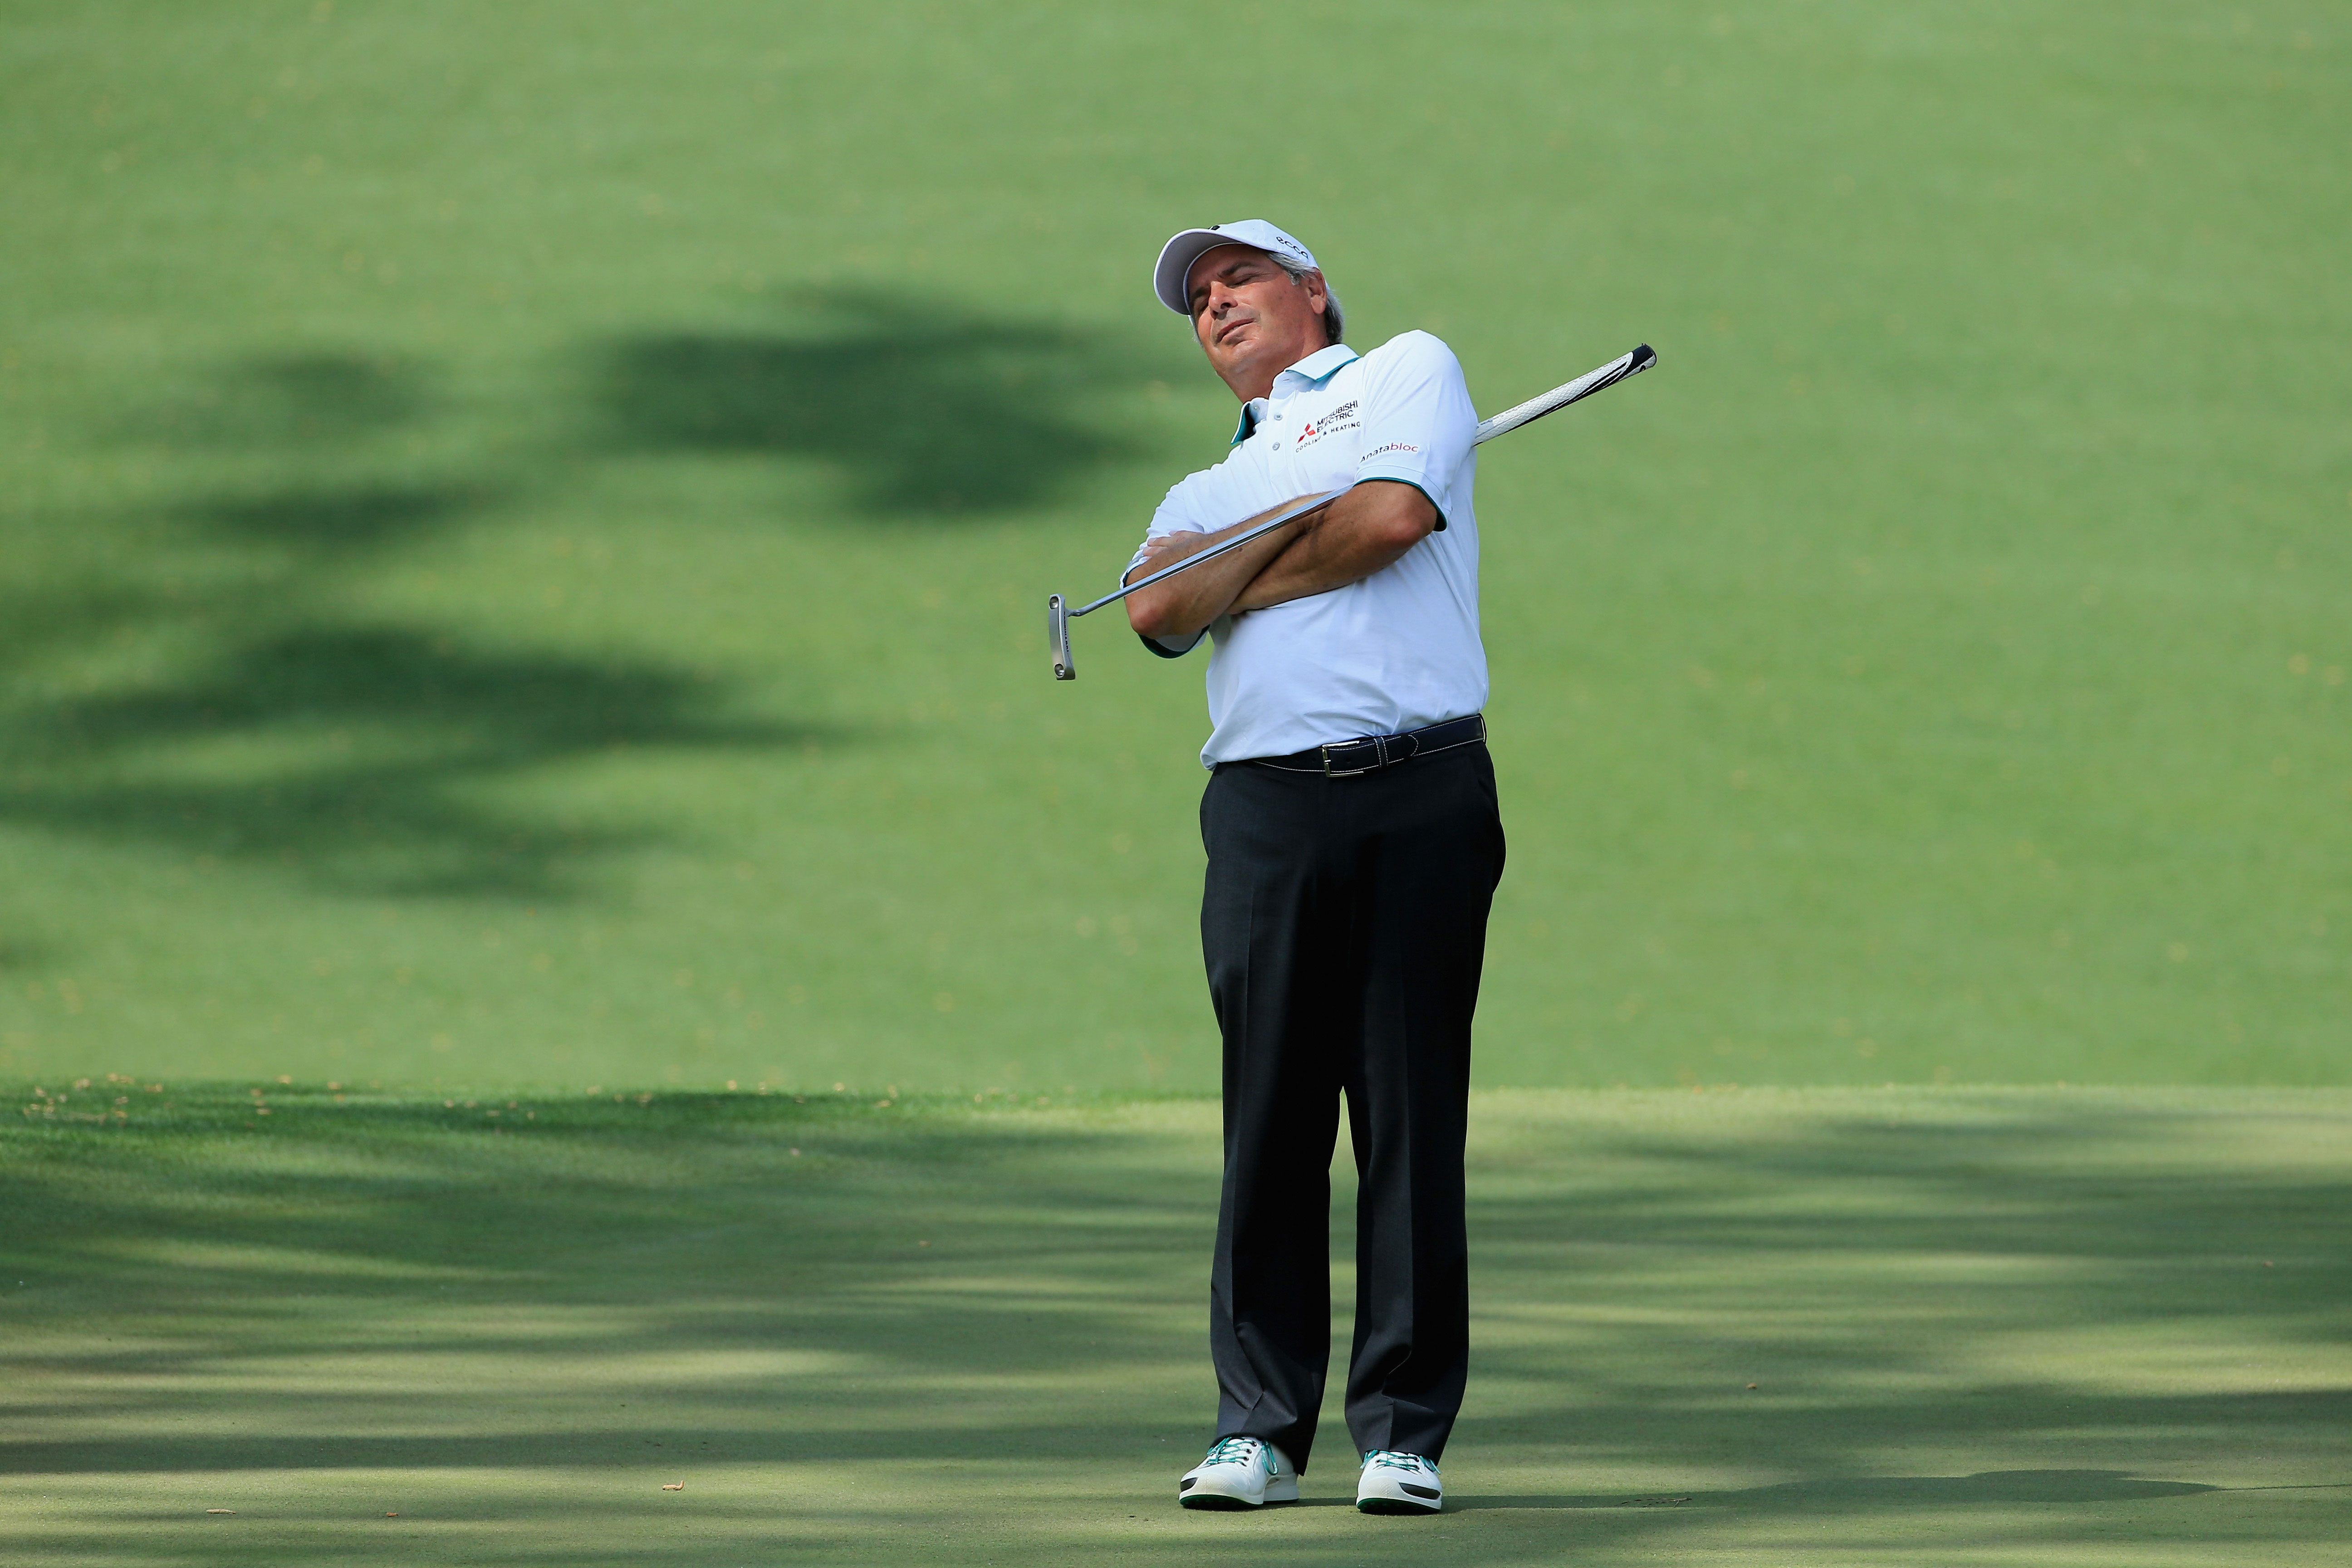 Couples fred Fred Couples